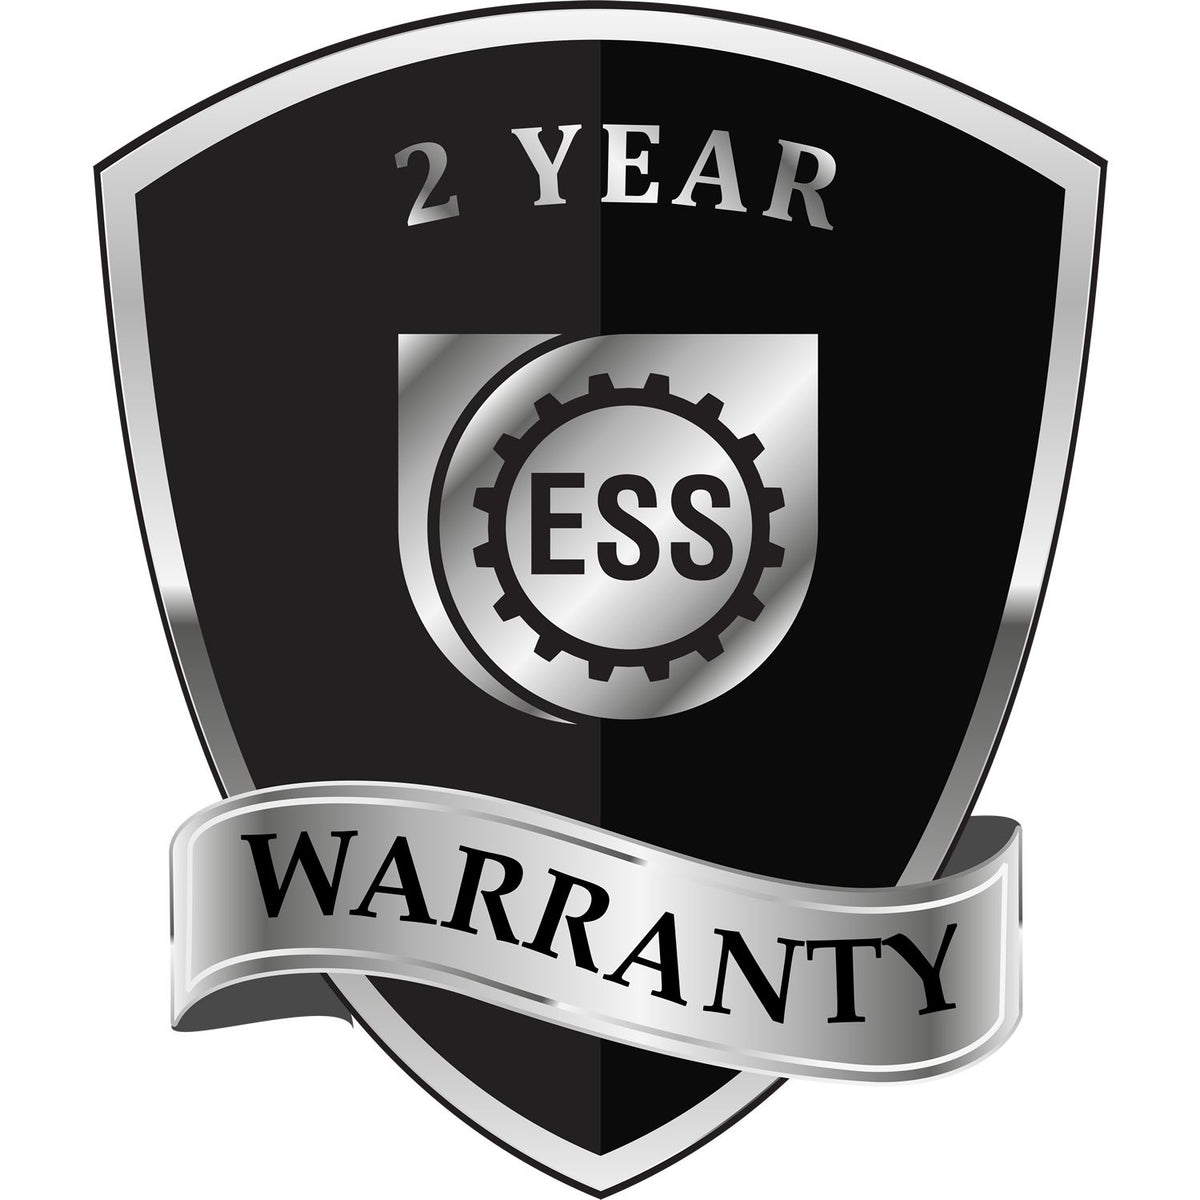 A black and silver badge or emblem showing warranty information for the Hybrid New Mexico Architect Seal